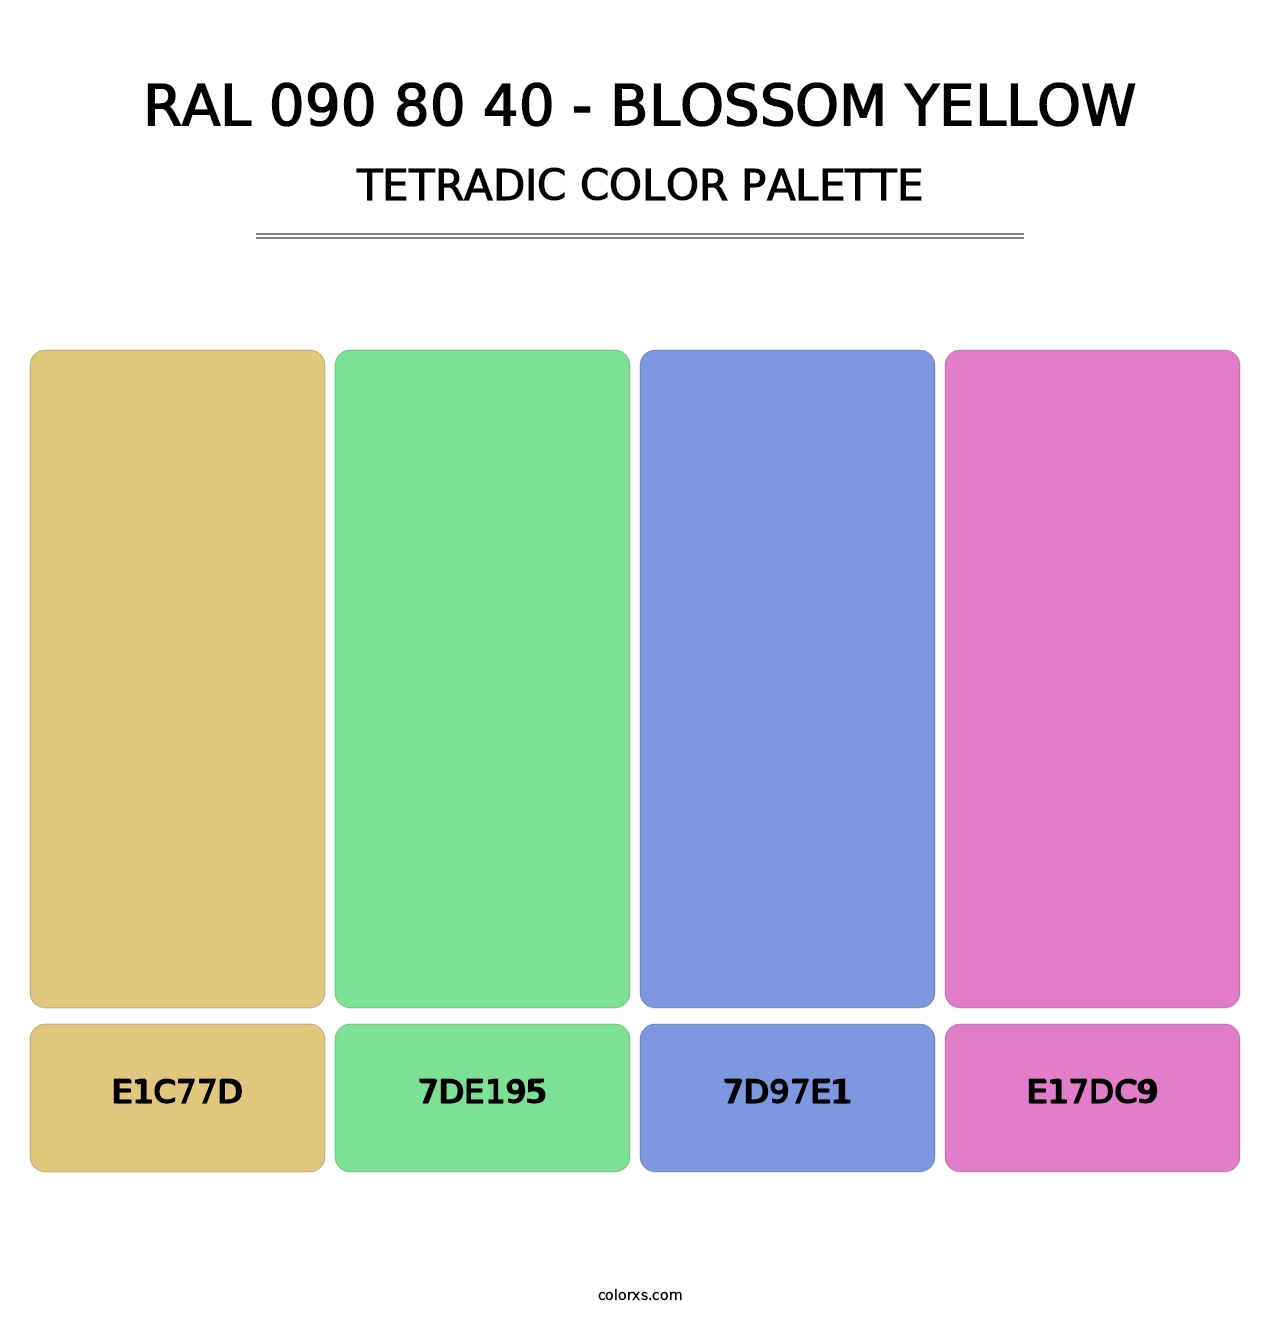 RAL 090 80 40 - Blossom Yellow - Tetradic Color Palette